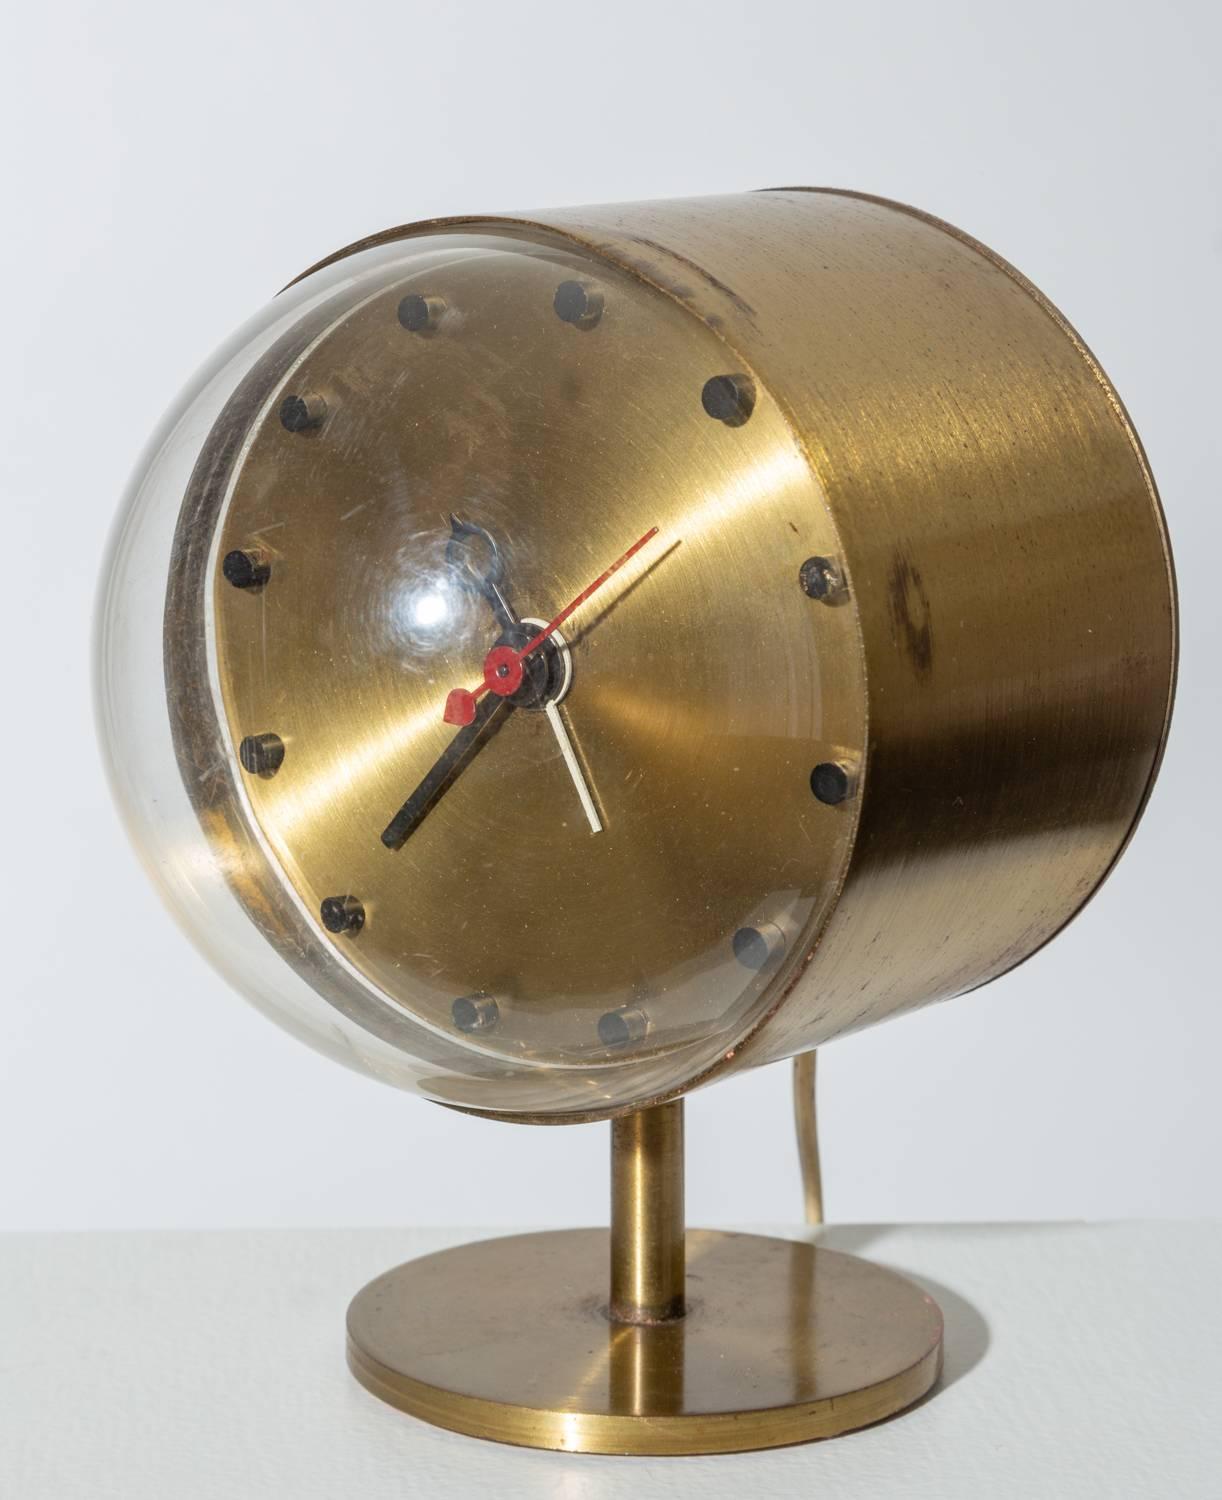 A round brass clock on a brass pedestal foot with a plexiglass bubble case, designed by George Nelson for Howard Miller. The clock has black hour and minute hands, a red second hand, and a white hand for the alarm function. Small black cylinders